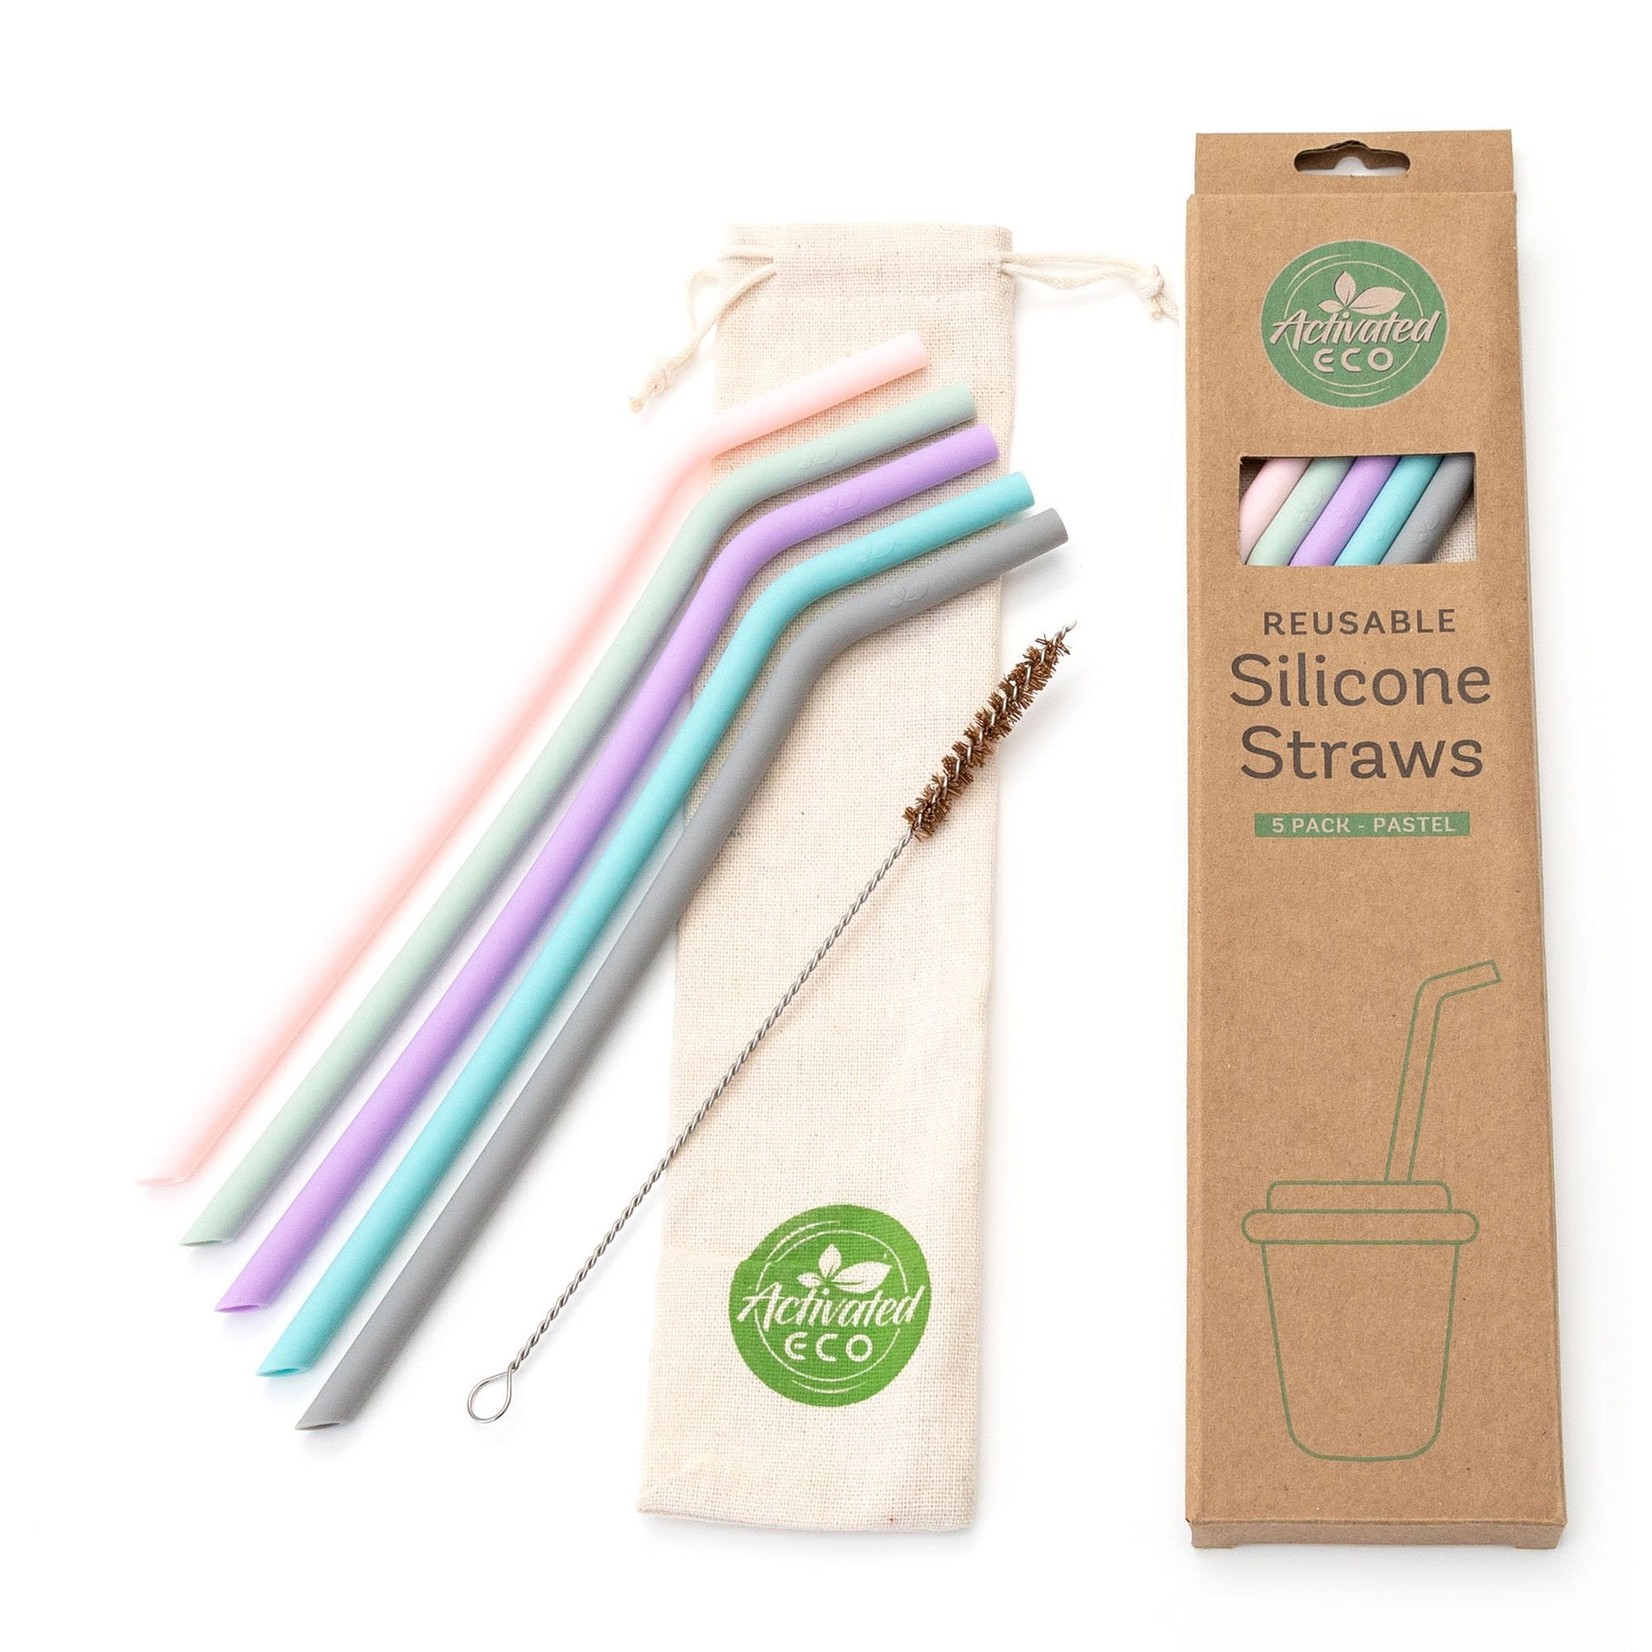 Activated Eco Silicone Straw Set (5)